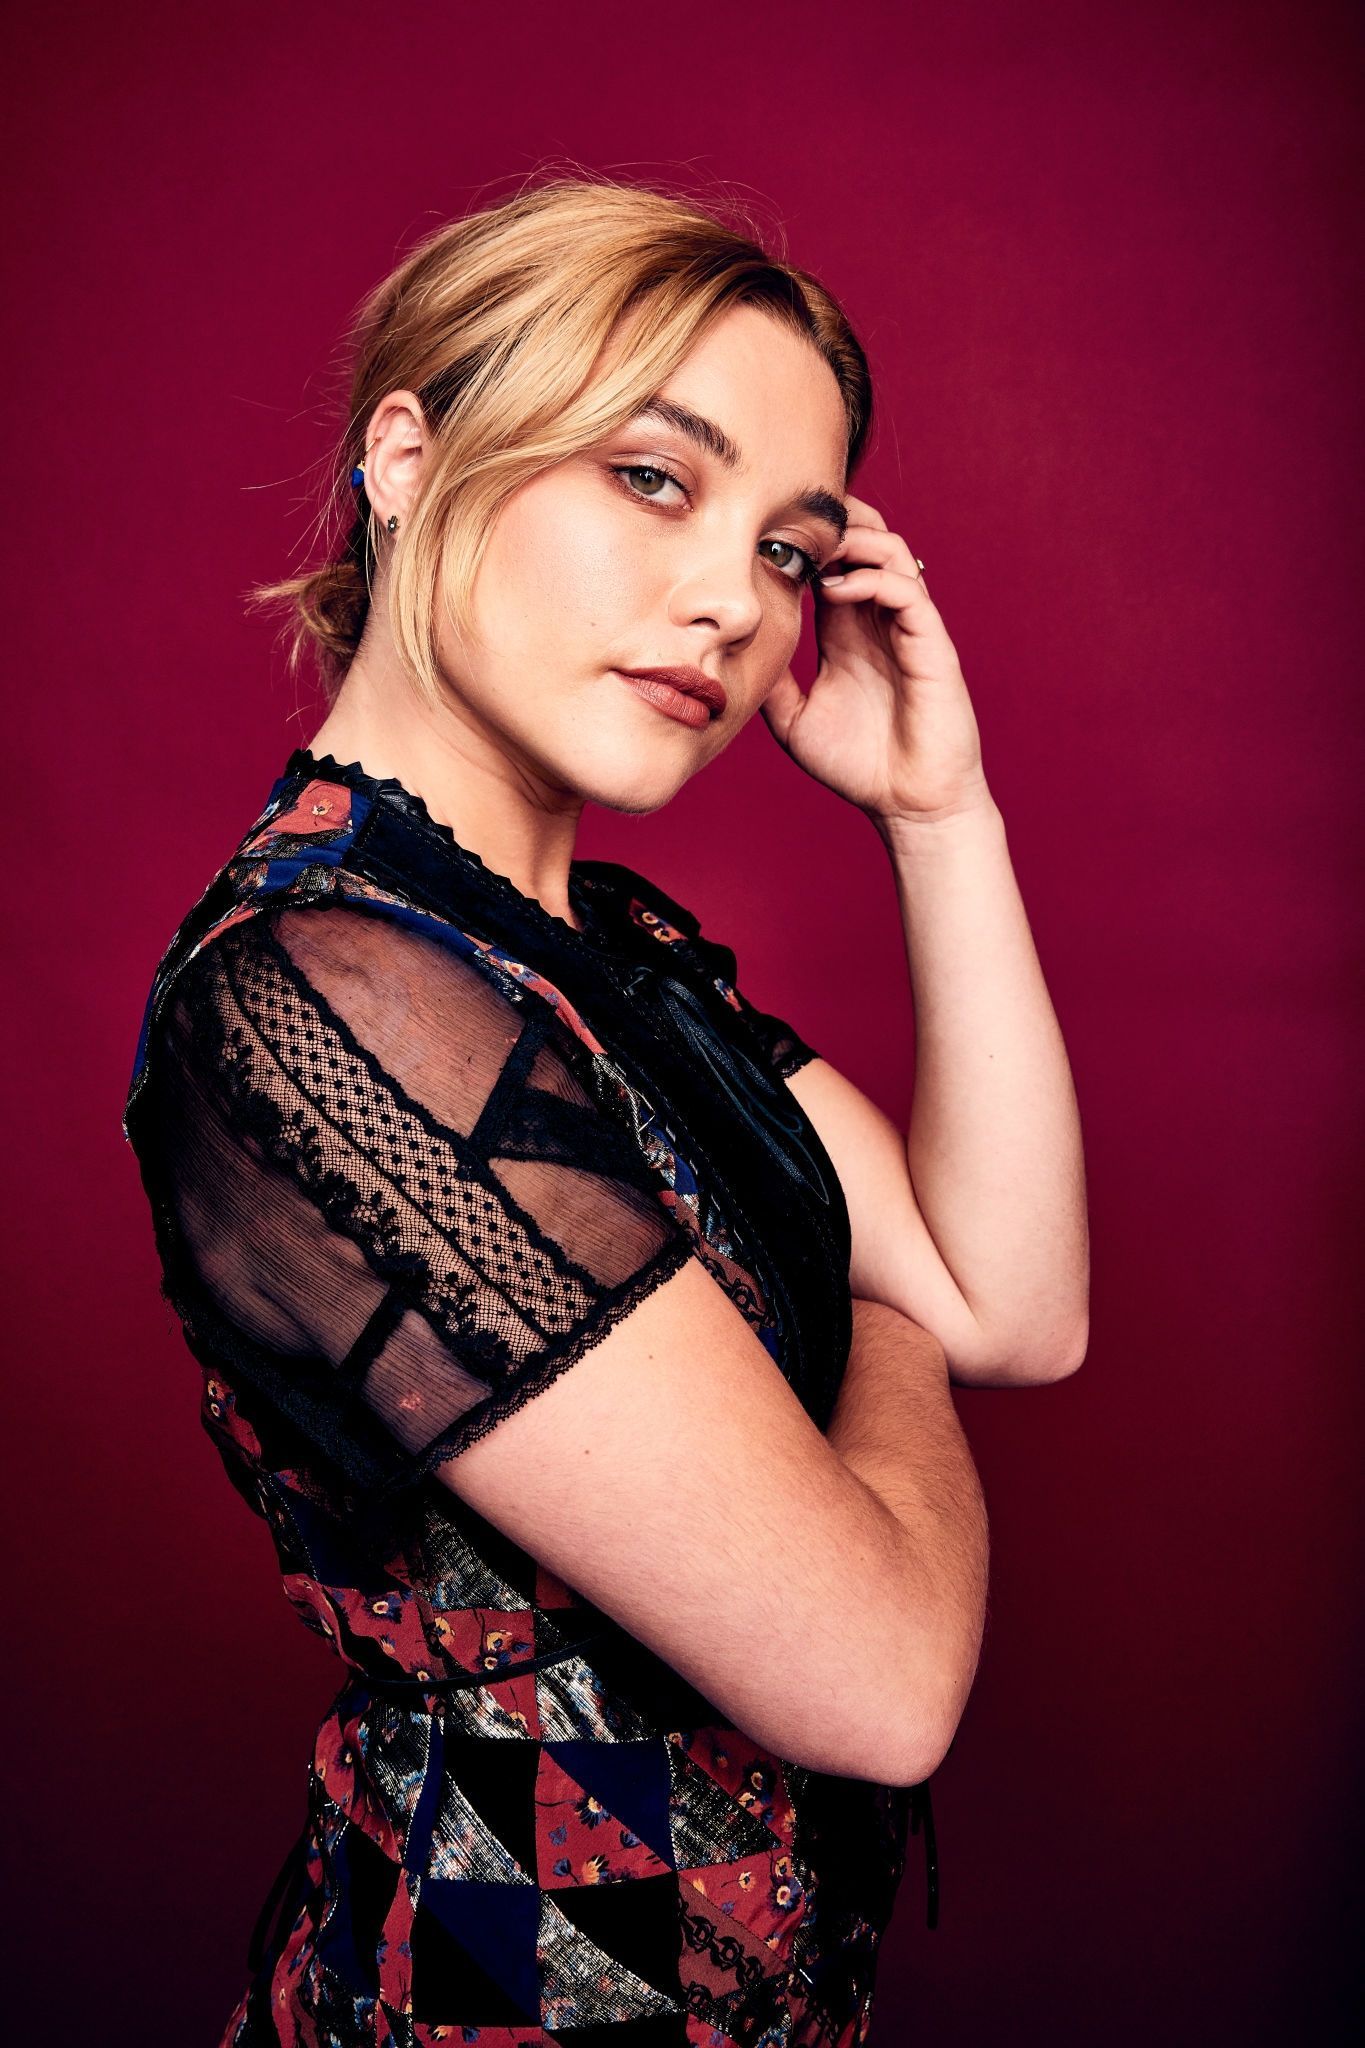 Saoirse Ronan in a floral top holding her hair - Florence Pugh